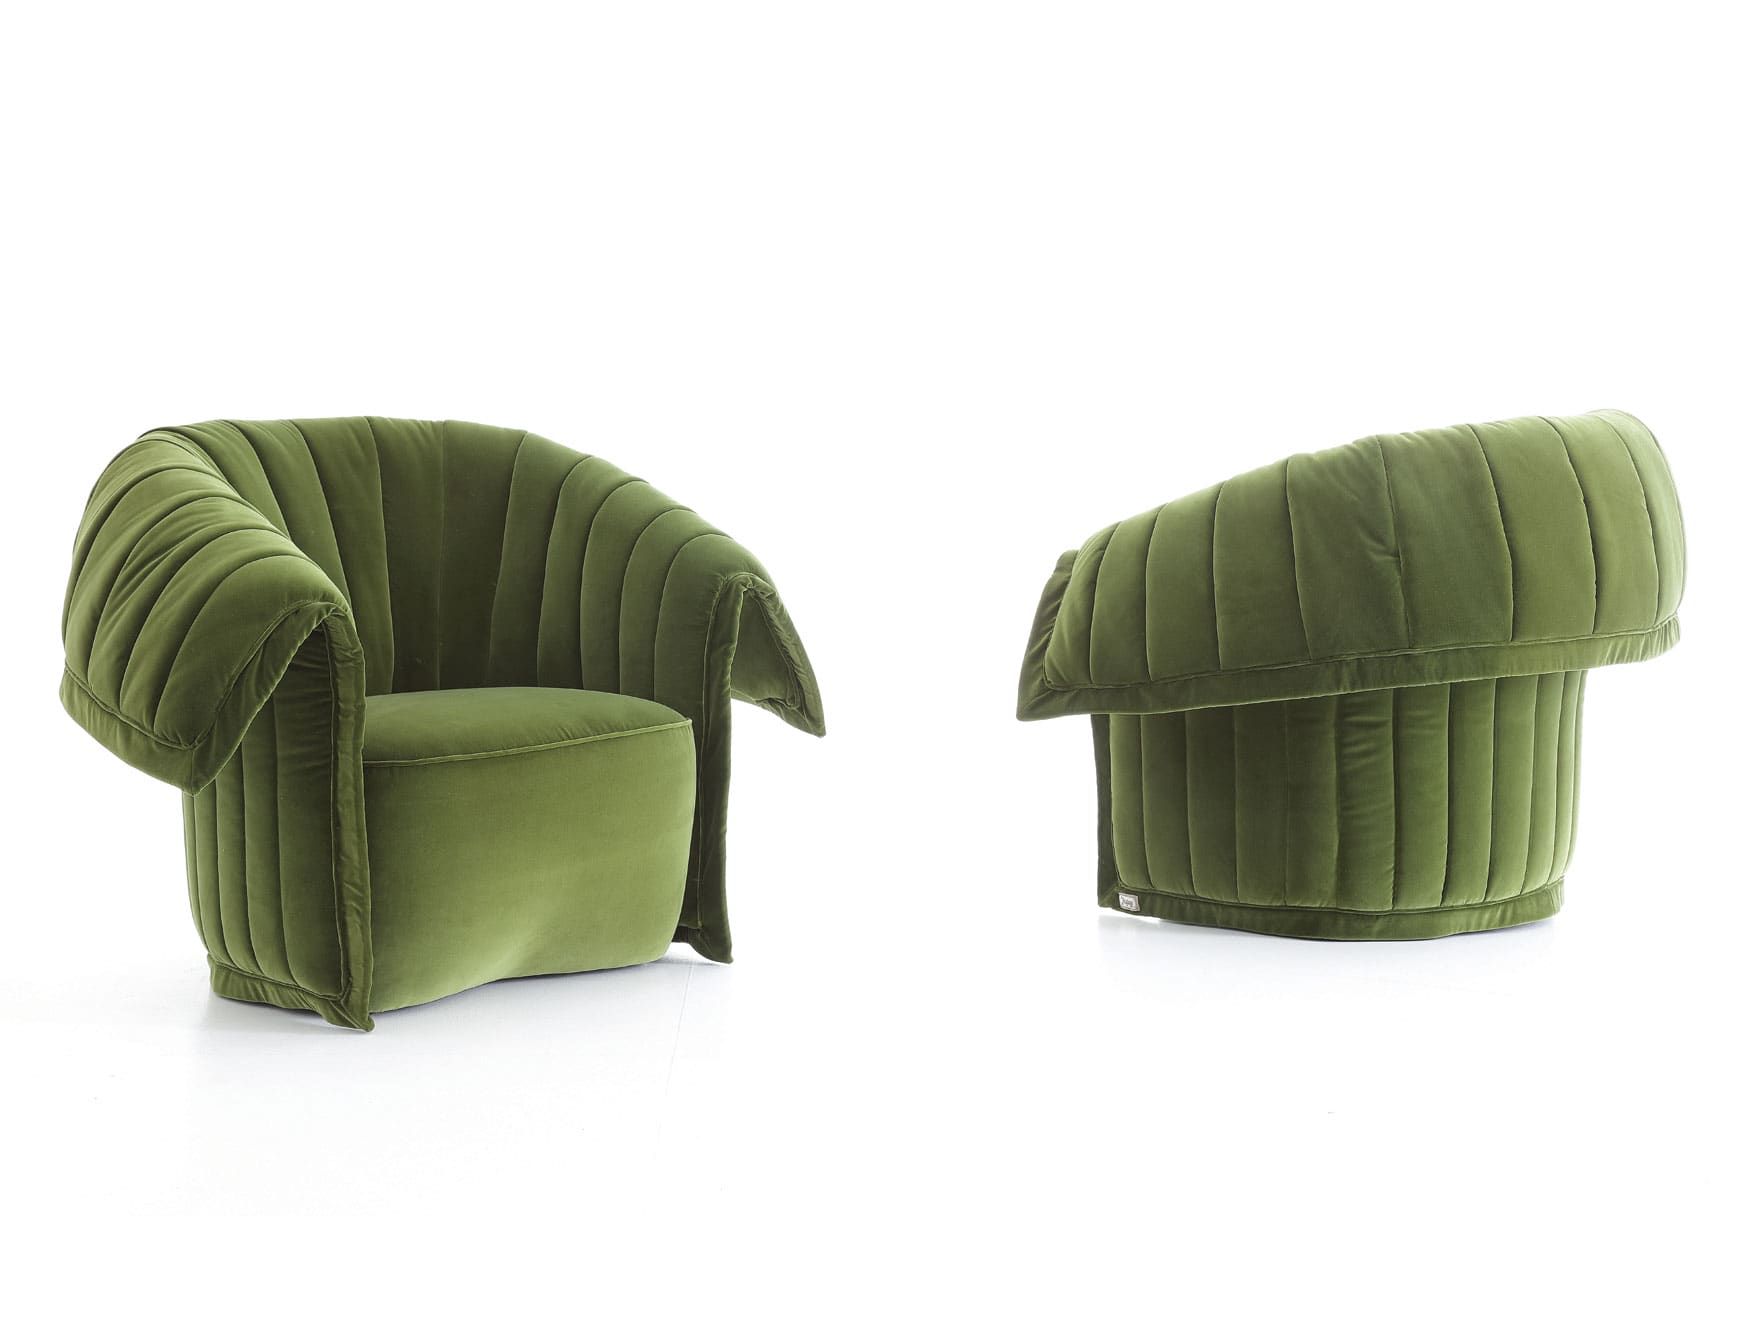 Manta modern luxury sofa chair with green leather